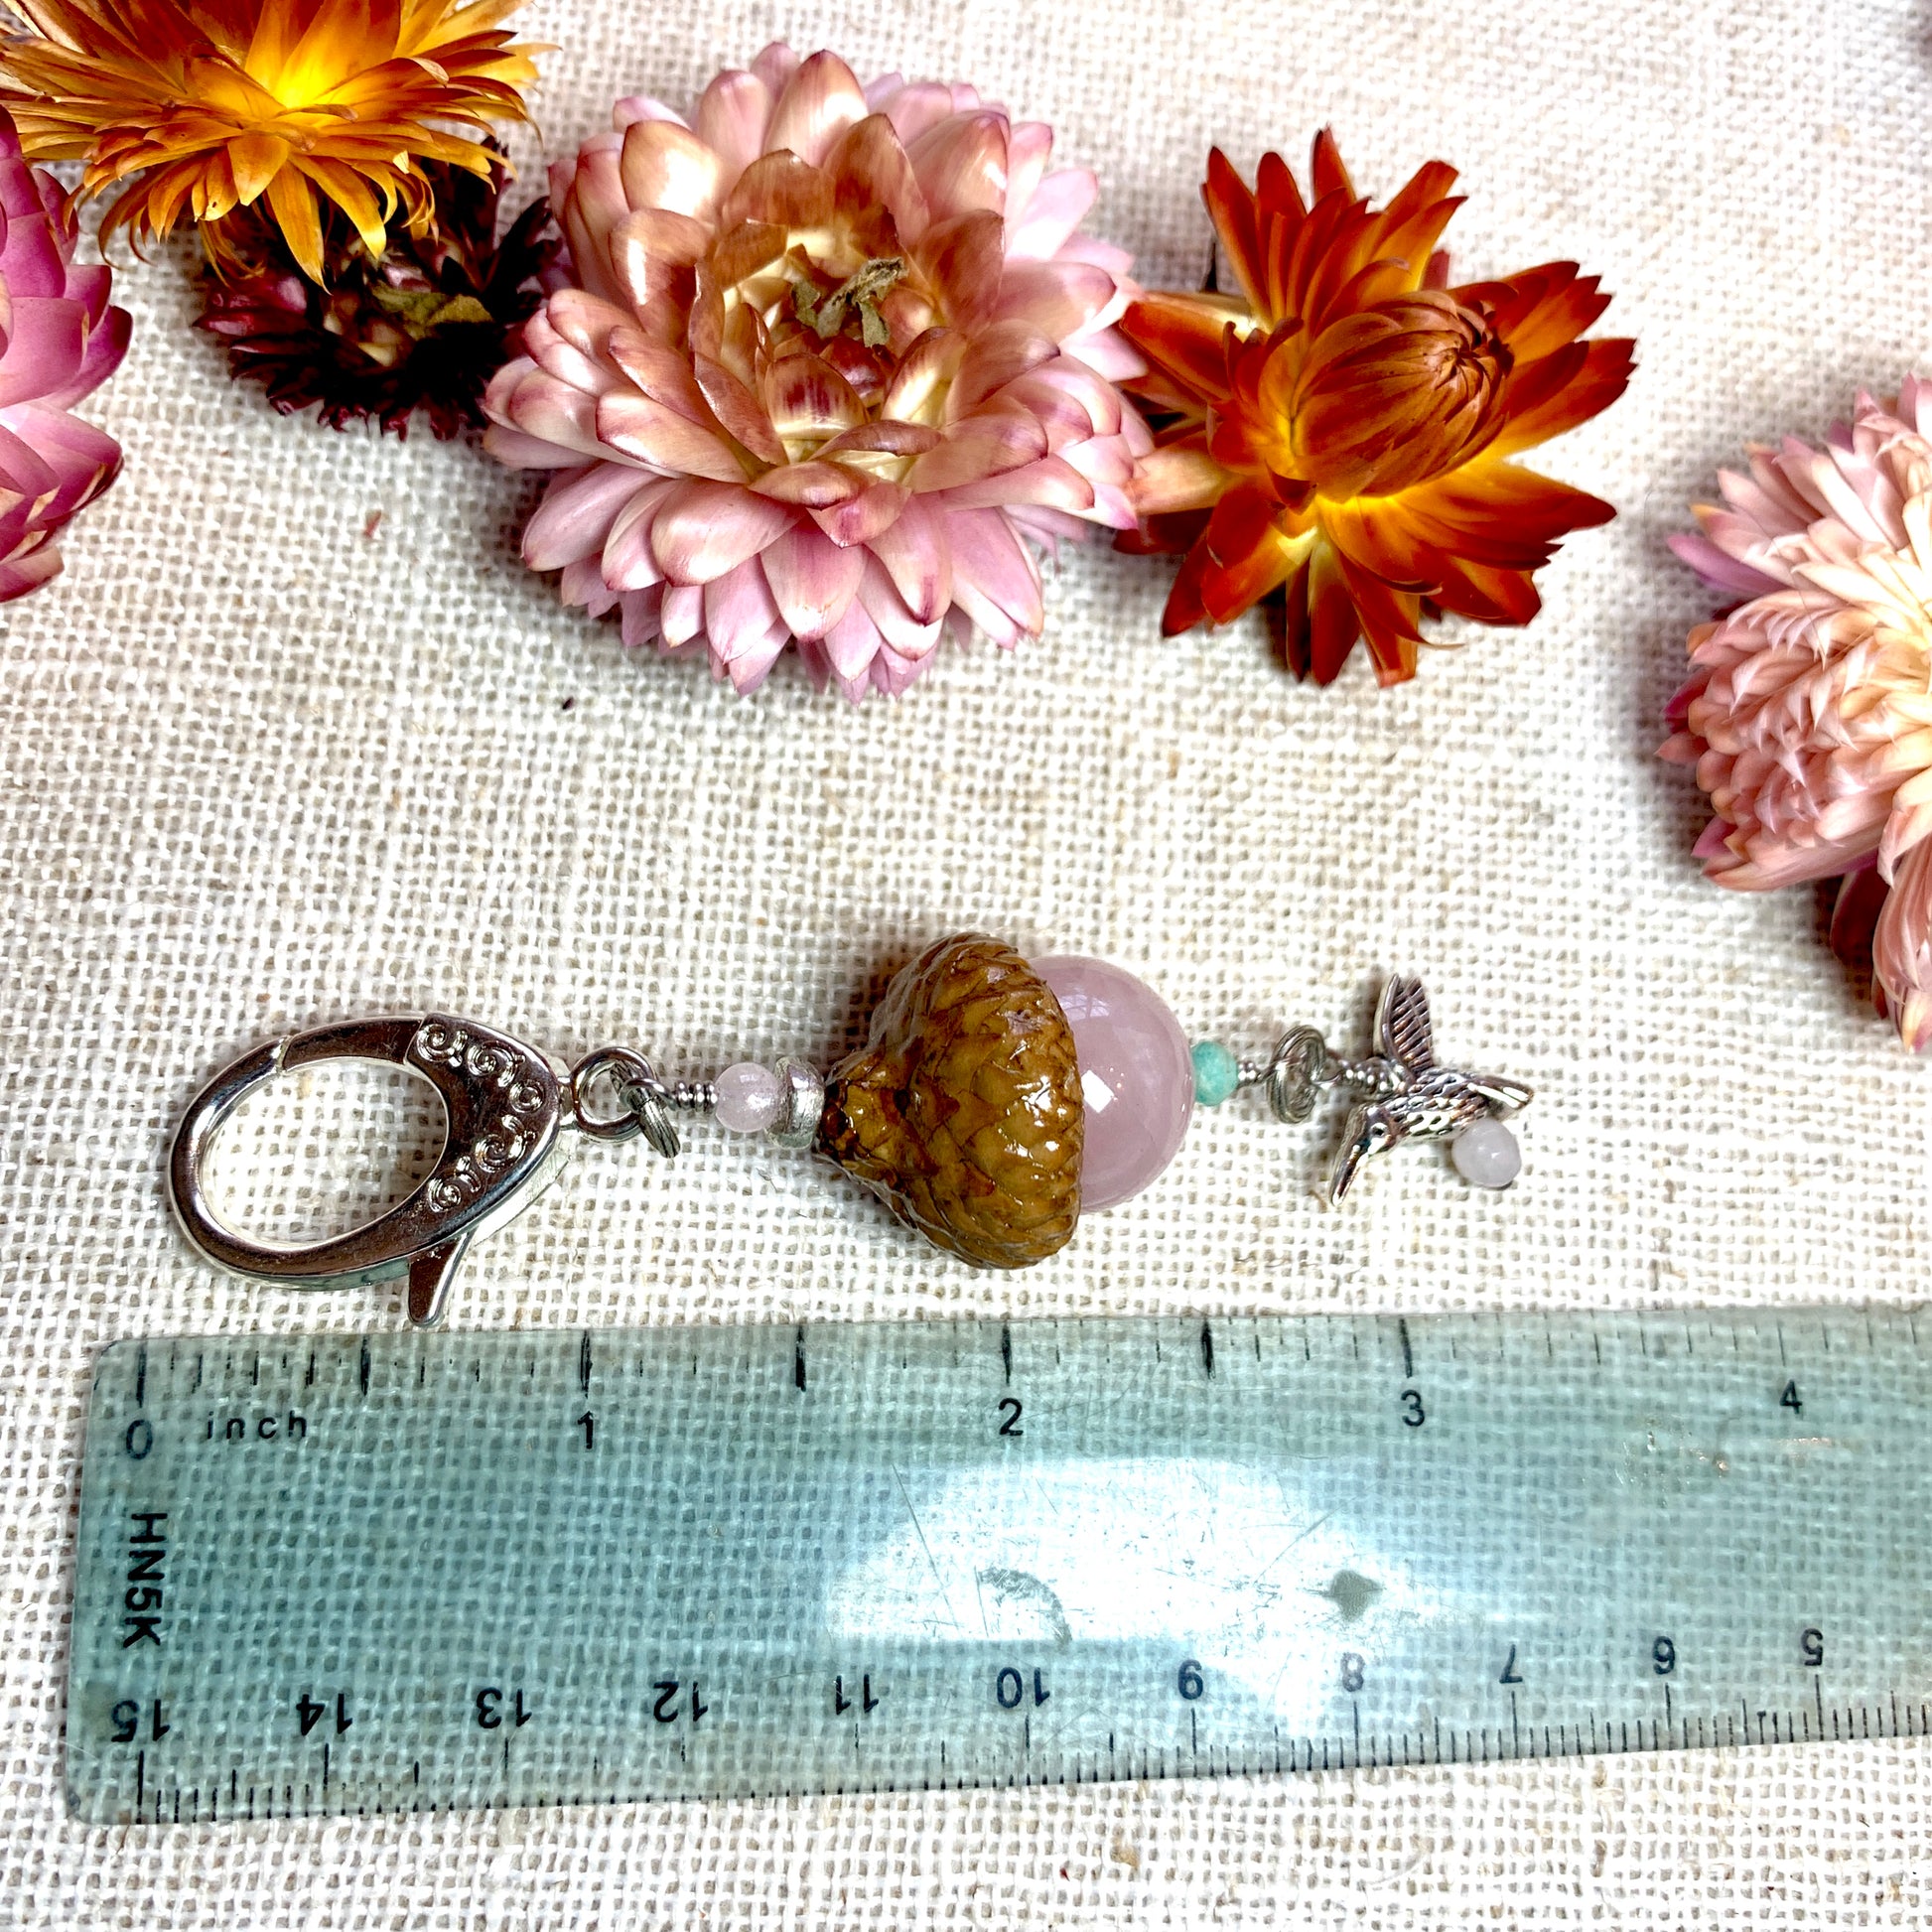 a ruler with flowers and a stone on it